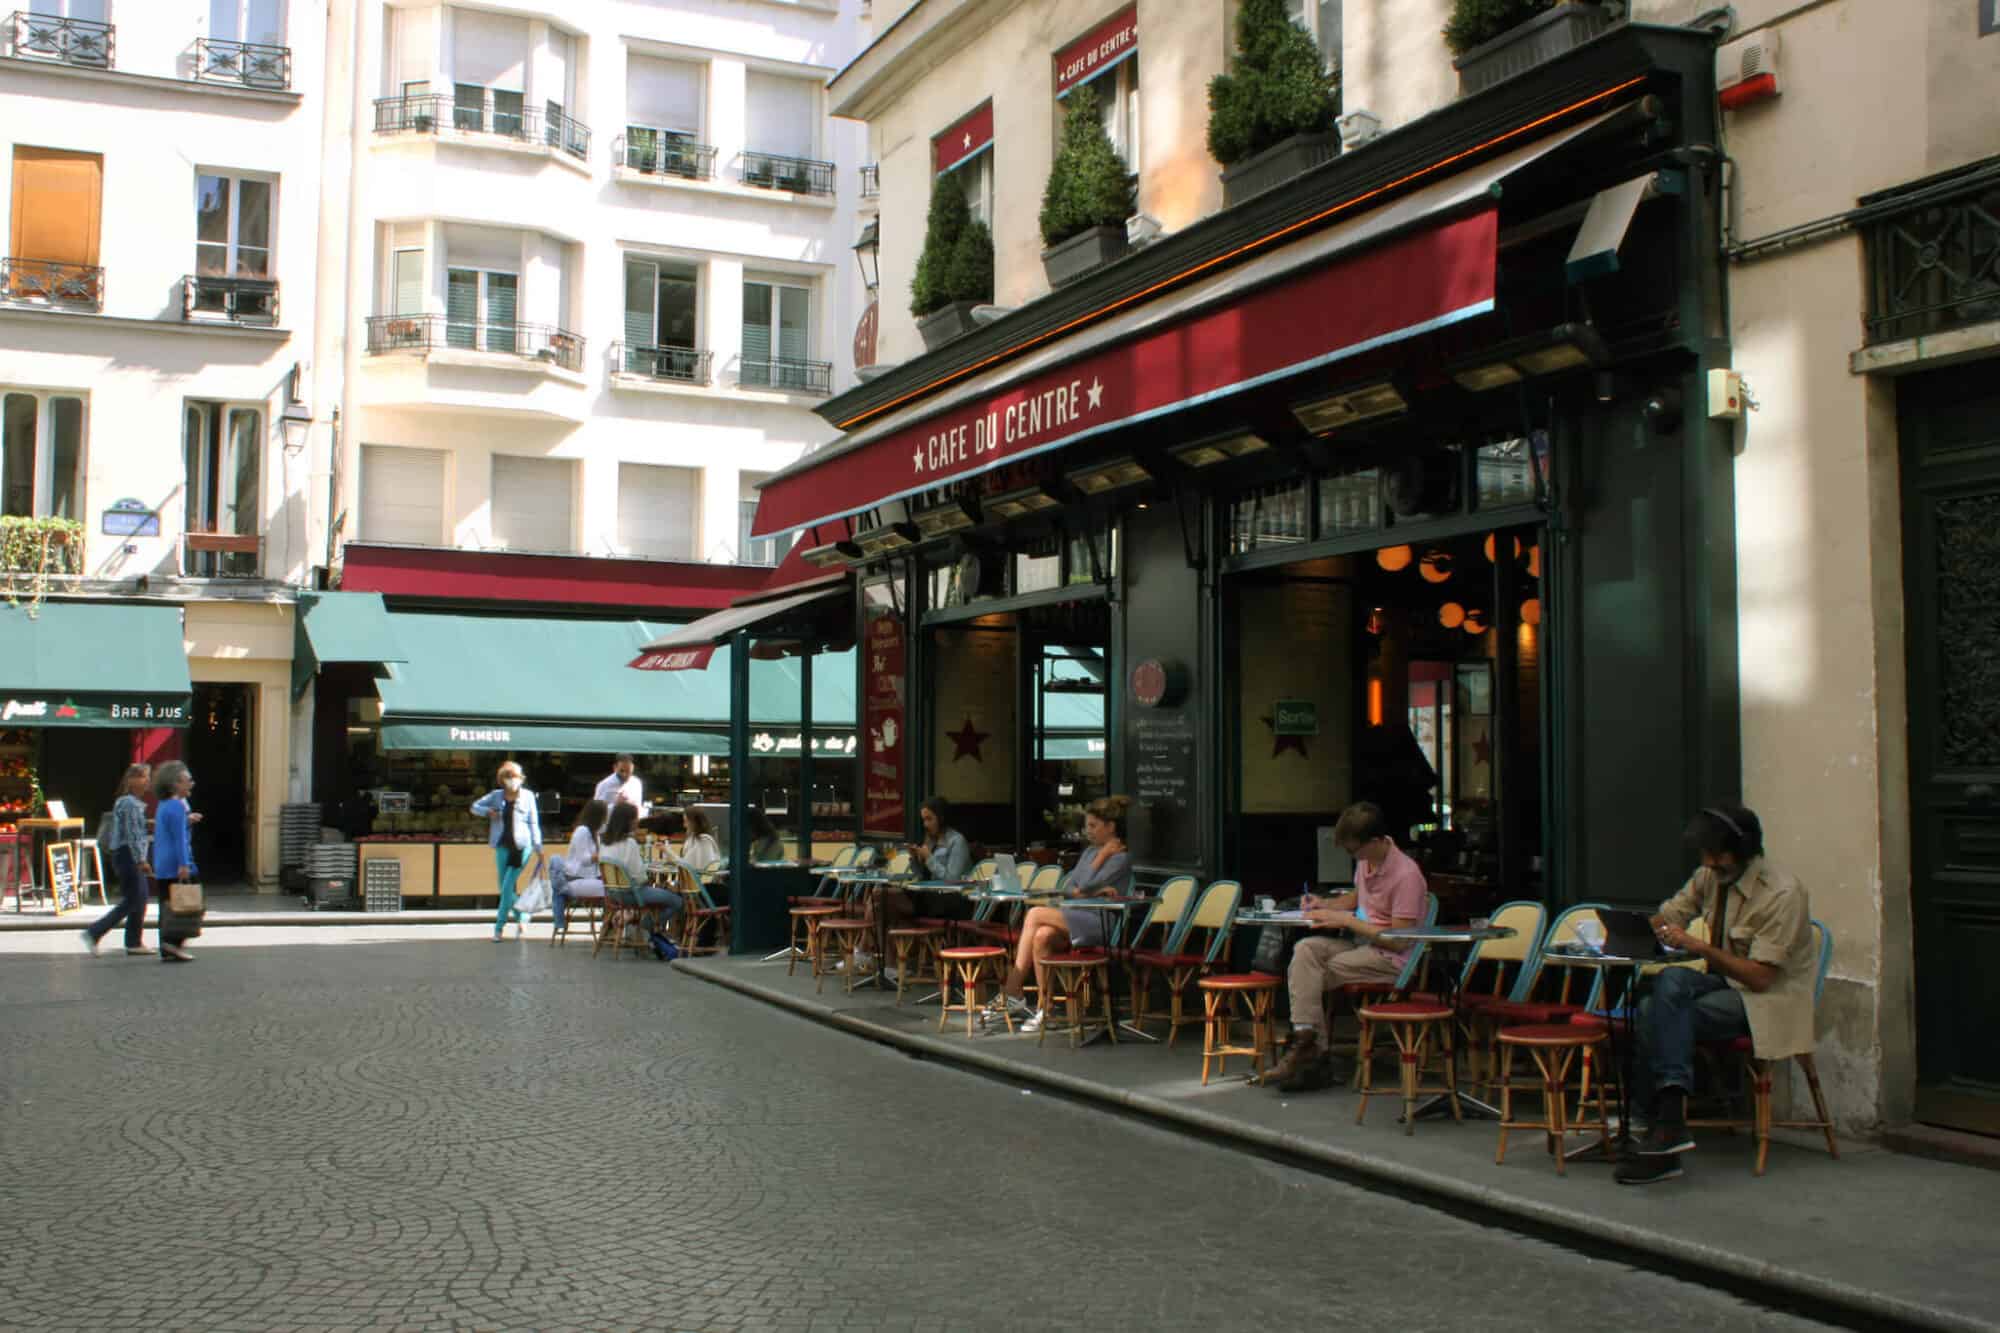 People sit socially distanced from each other at outdoor tables at a café near Rue de Montorgueil in the center of Paris.